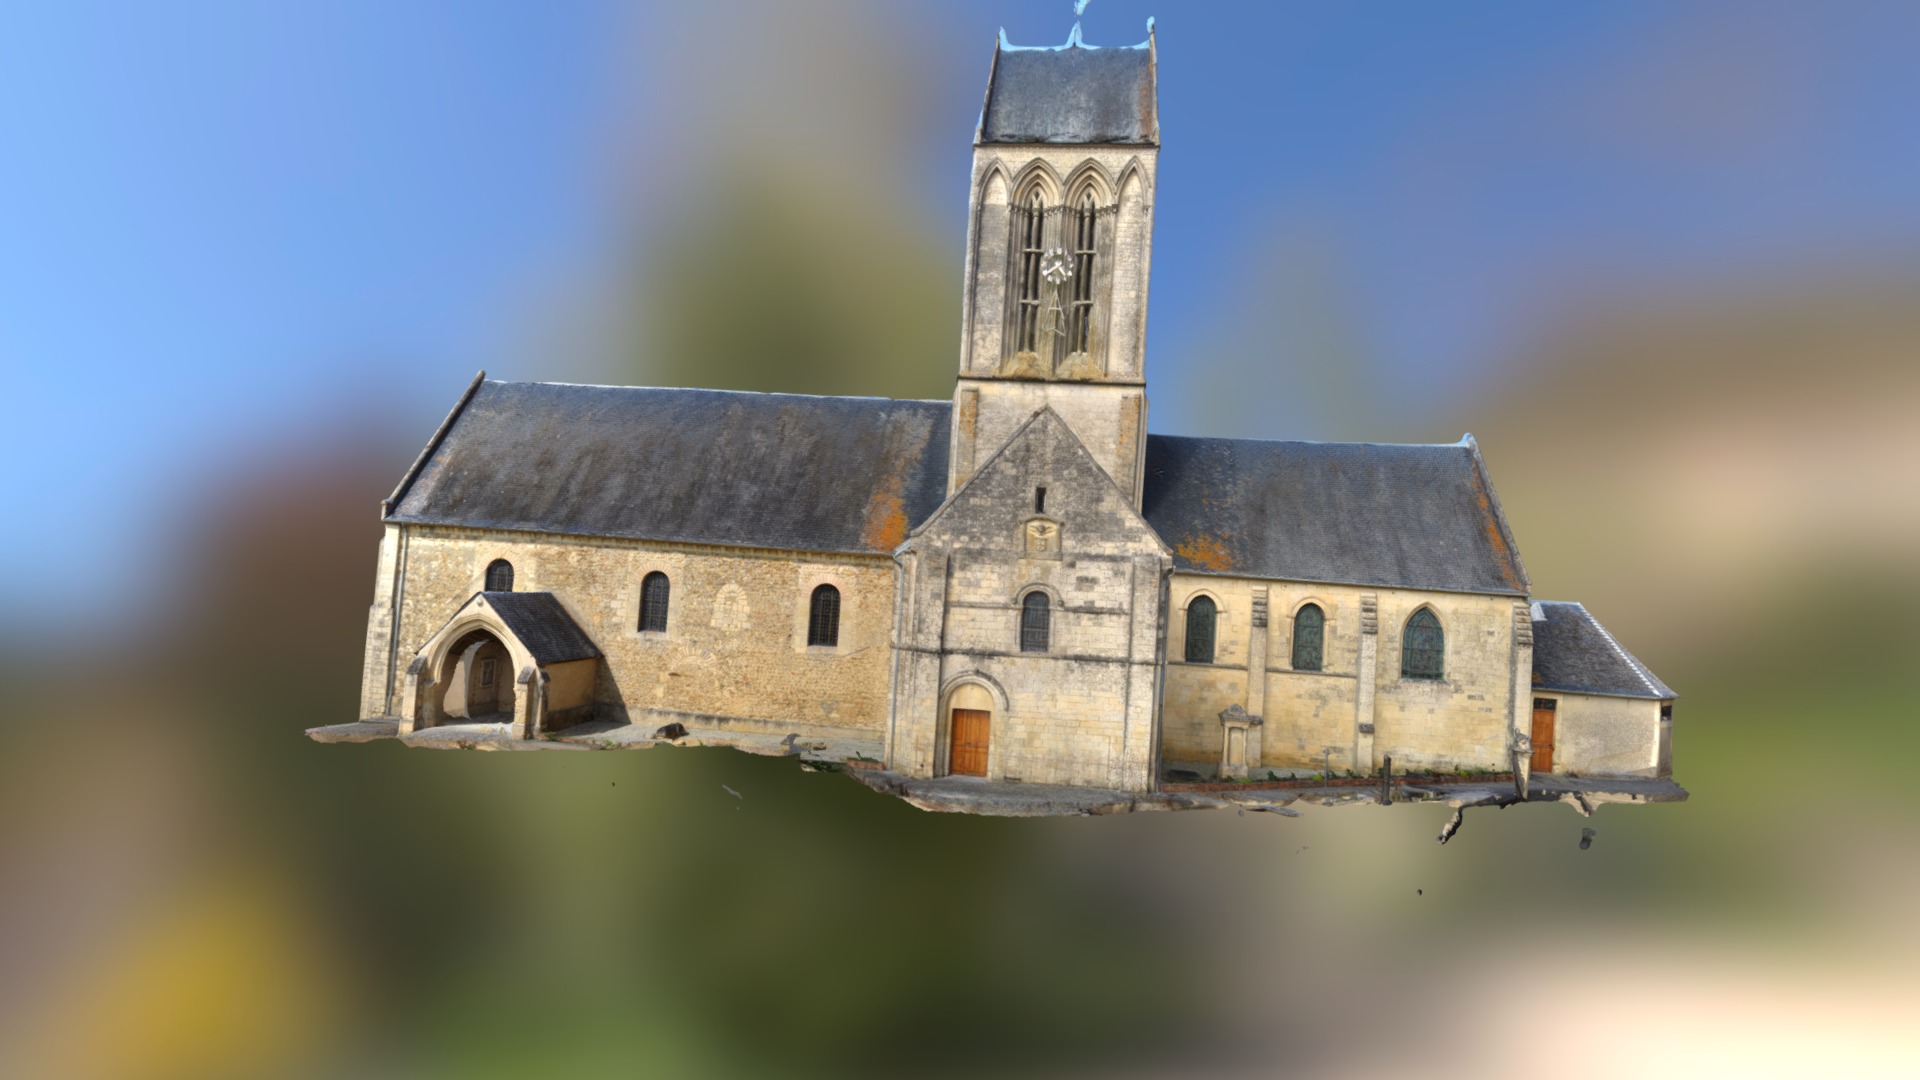 3D model tilly sur seulles church, France - This is a 3D model of the tilly sur seulles church, France. The 3D model is about a castle on a lake.